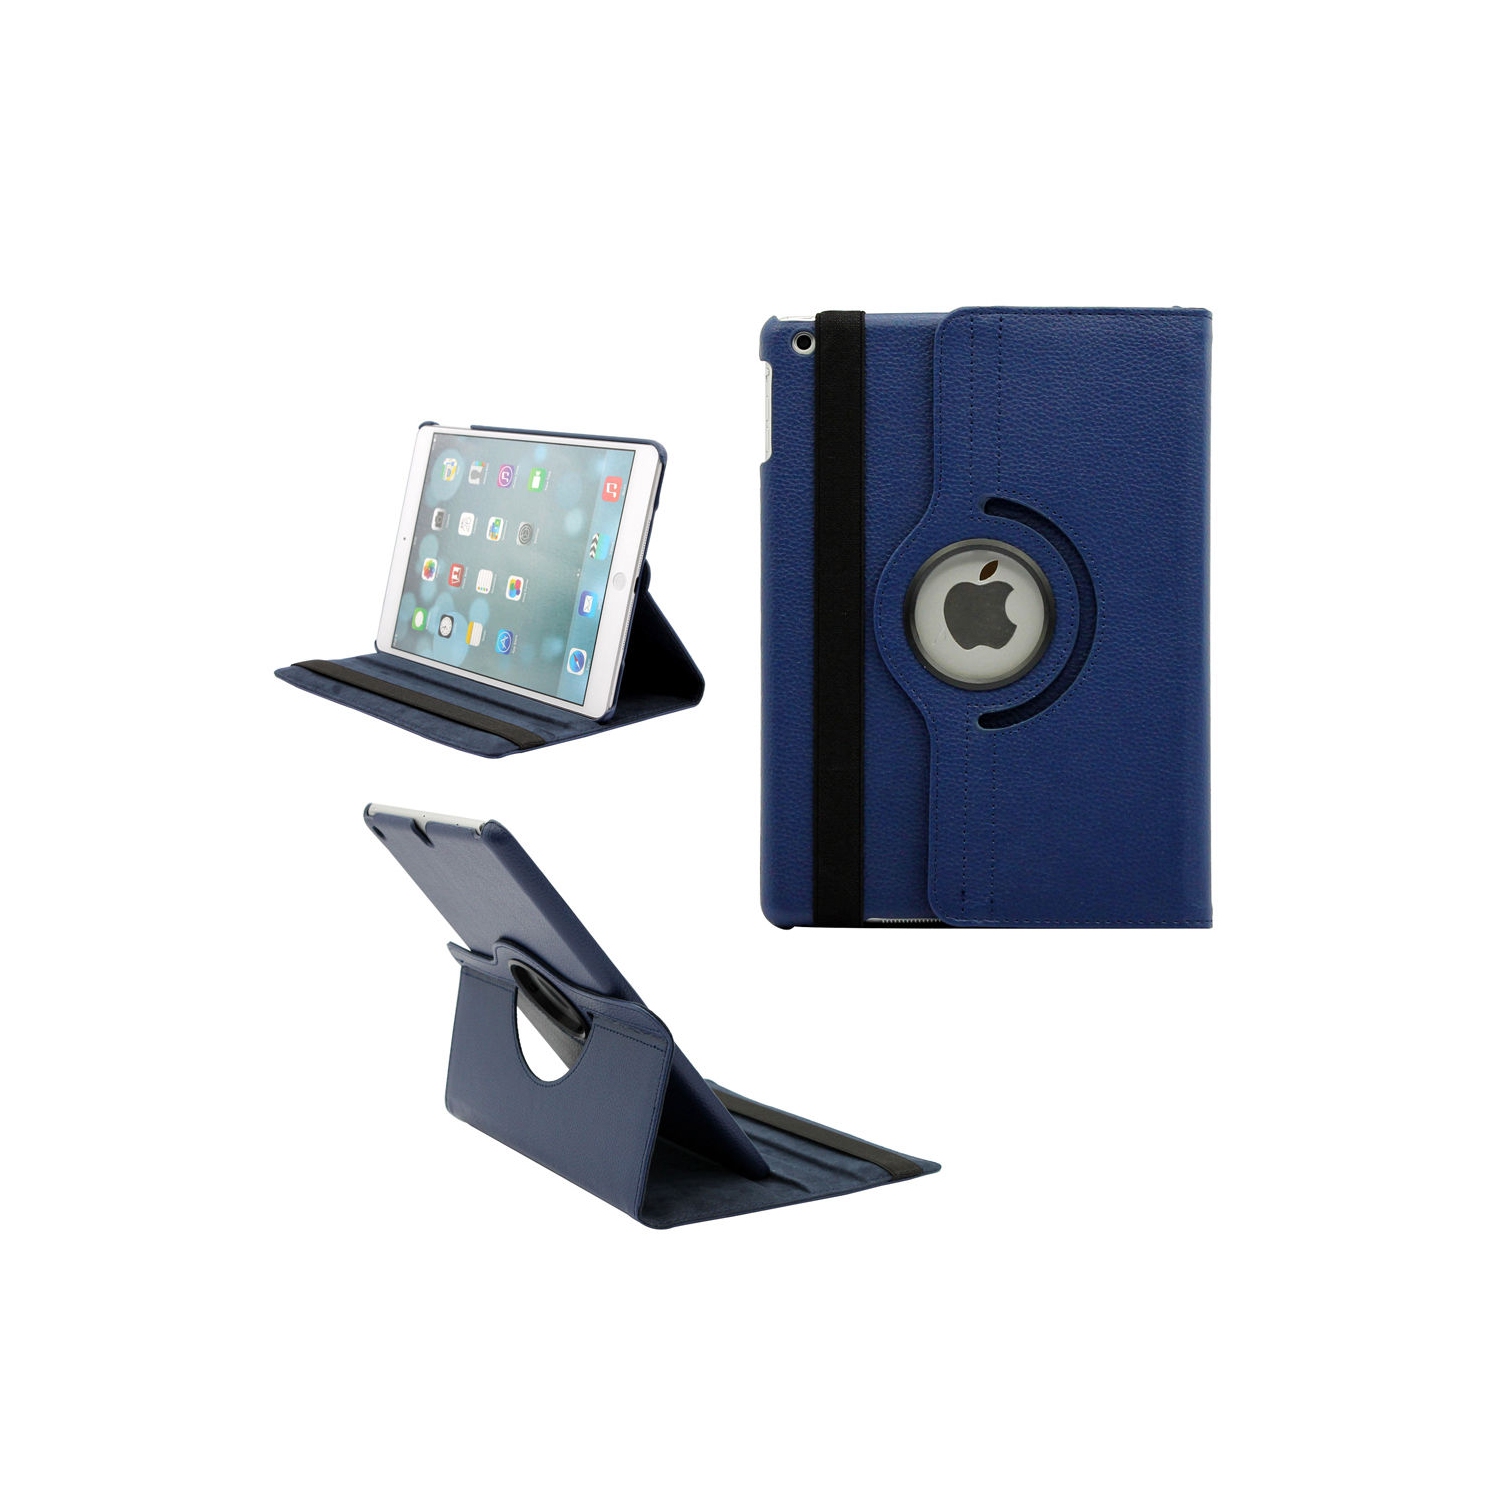 【CSmart】 360 Rotating PU Leather Stand Case Smart Cover for iPad Air 1 2 1st 2nd Gen, Navy